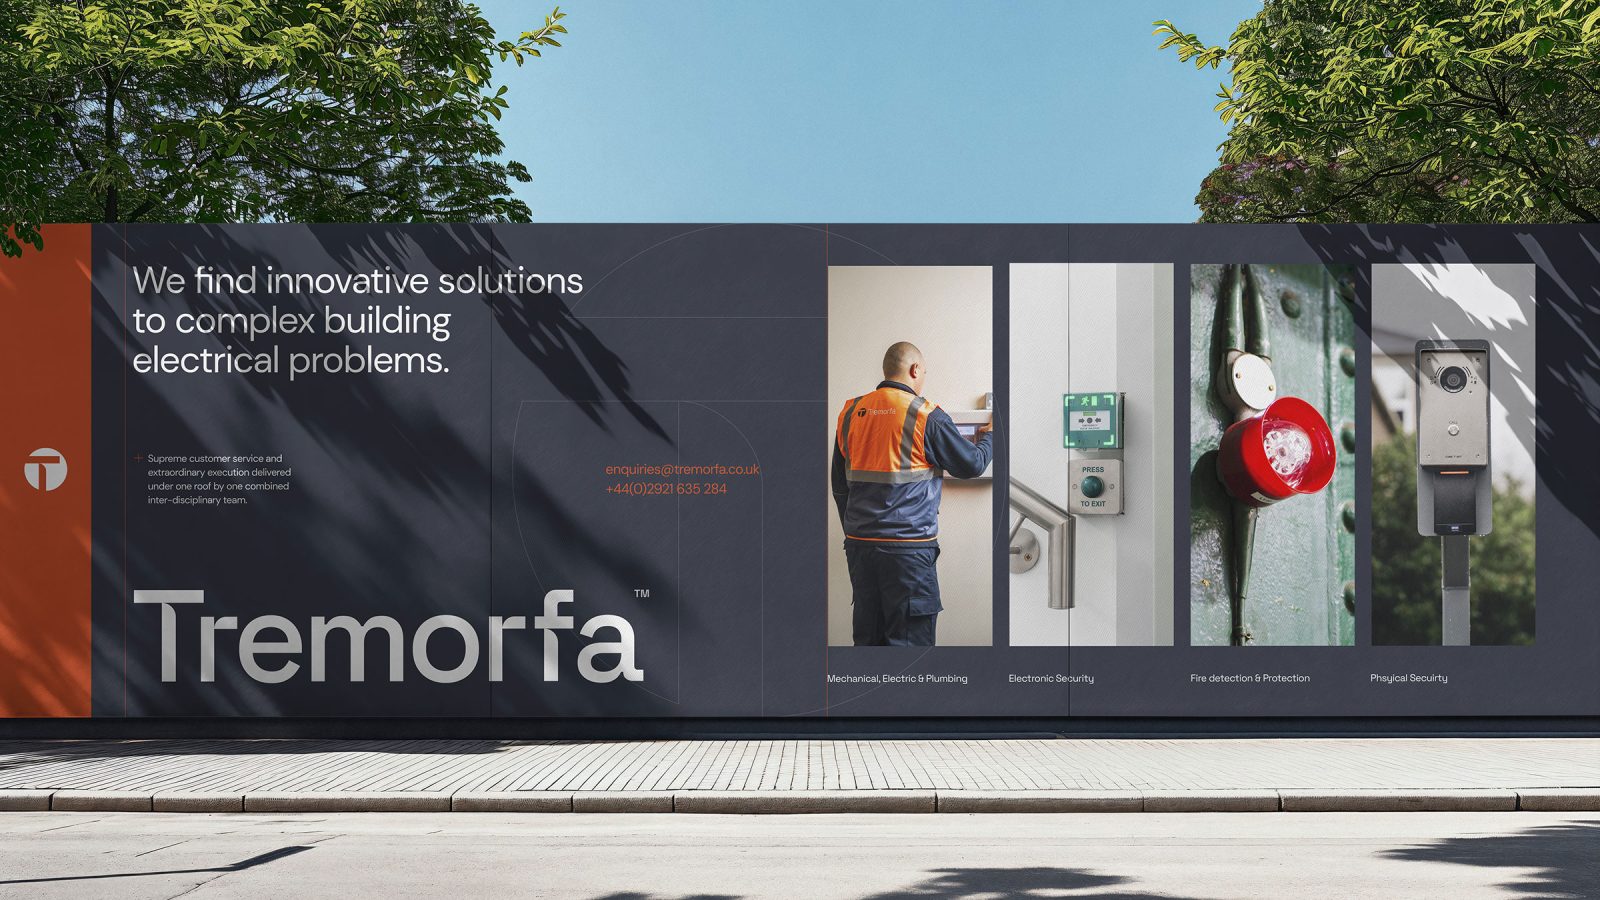 An outdoor billboard for Tremorfa designed by Brand Agency Cardiff, featuring an electrician working on electrical panels, accompanied by text promoting innovative solutions to complex building electrical problems.